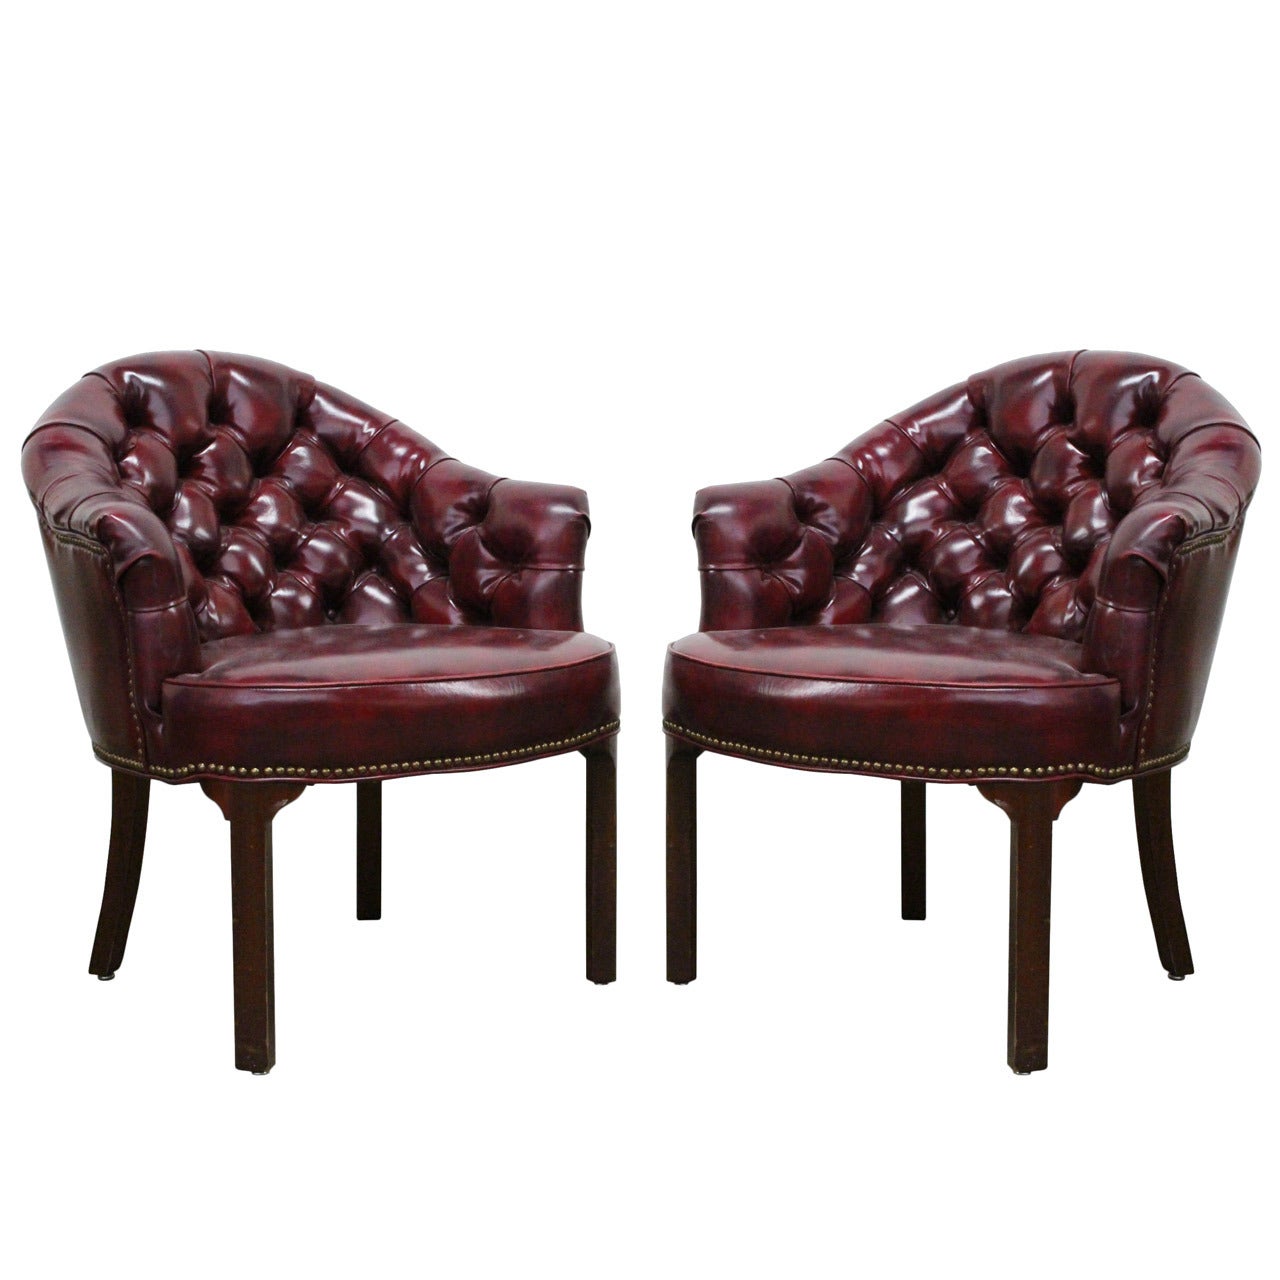 Pair of Oxblood Tufted Chairs